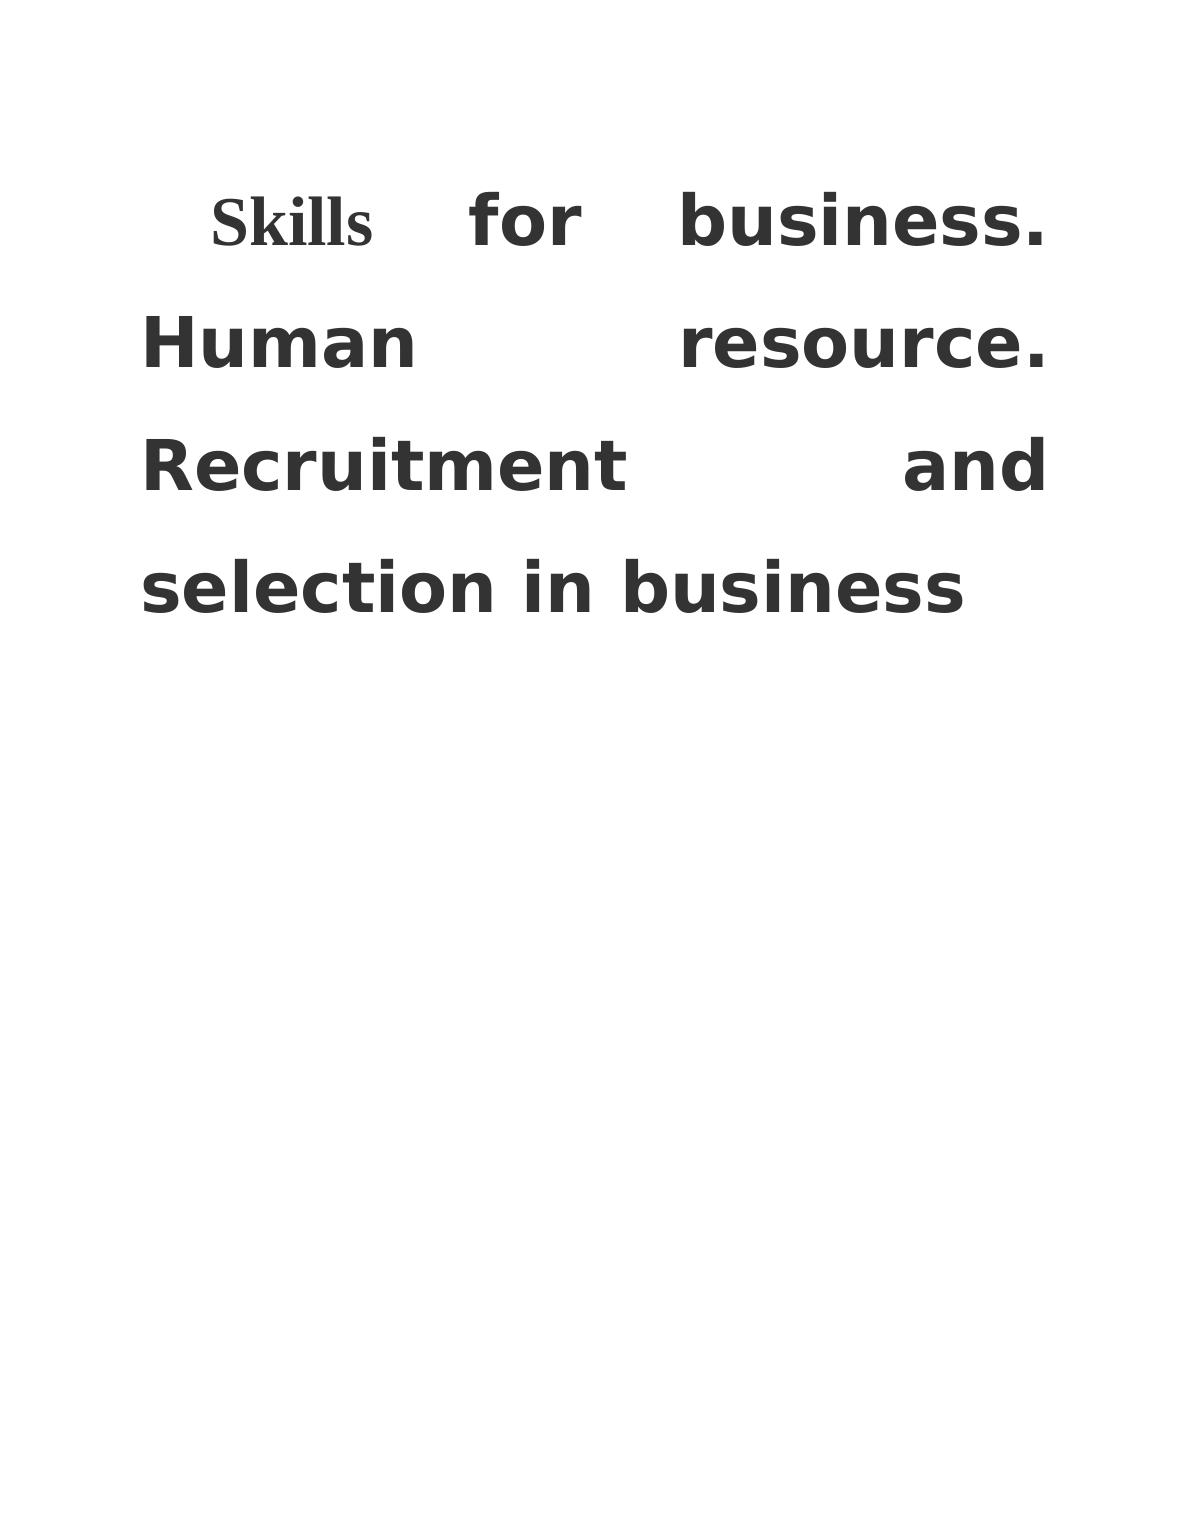 Human Resource. Recruitment and Selection in Business Introduction 3 Task 14 1.1 Recruitment plan. 4 Task 25 2.1 Impact of legal framework ion recruitment. 5 Task 35 4.1 Recruitment and selection in b_1